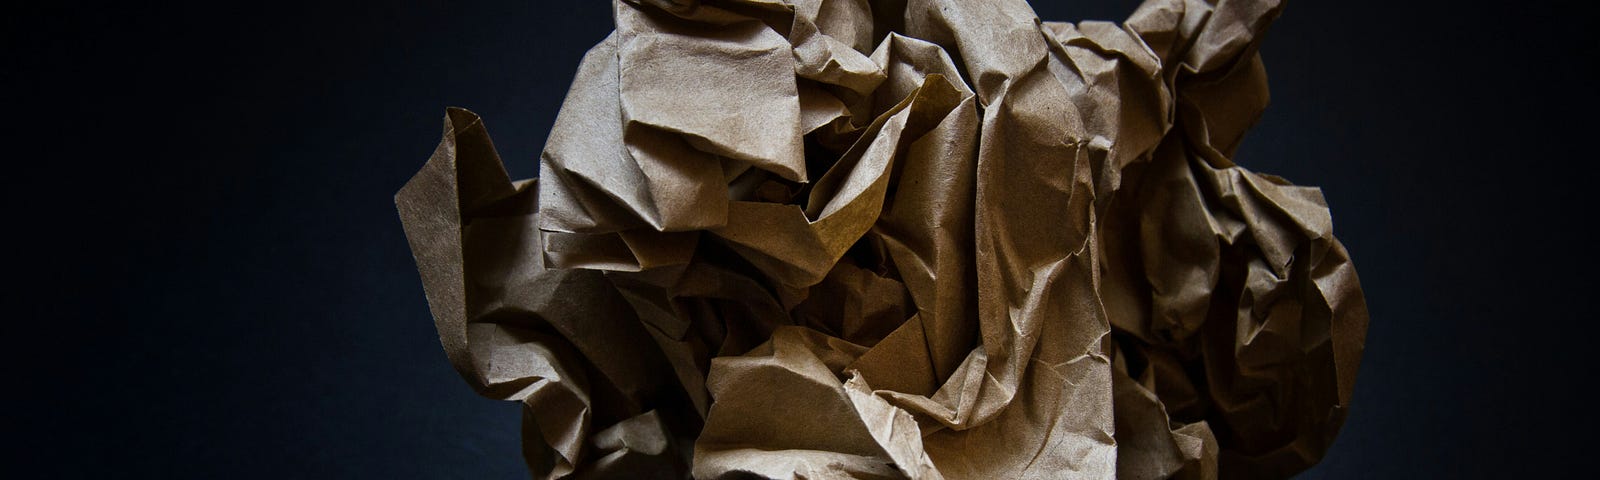 Paper scrunched up into a ball.